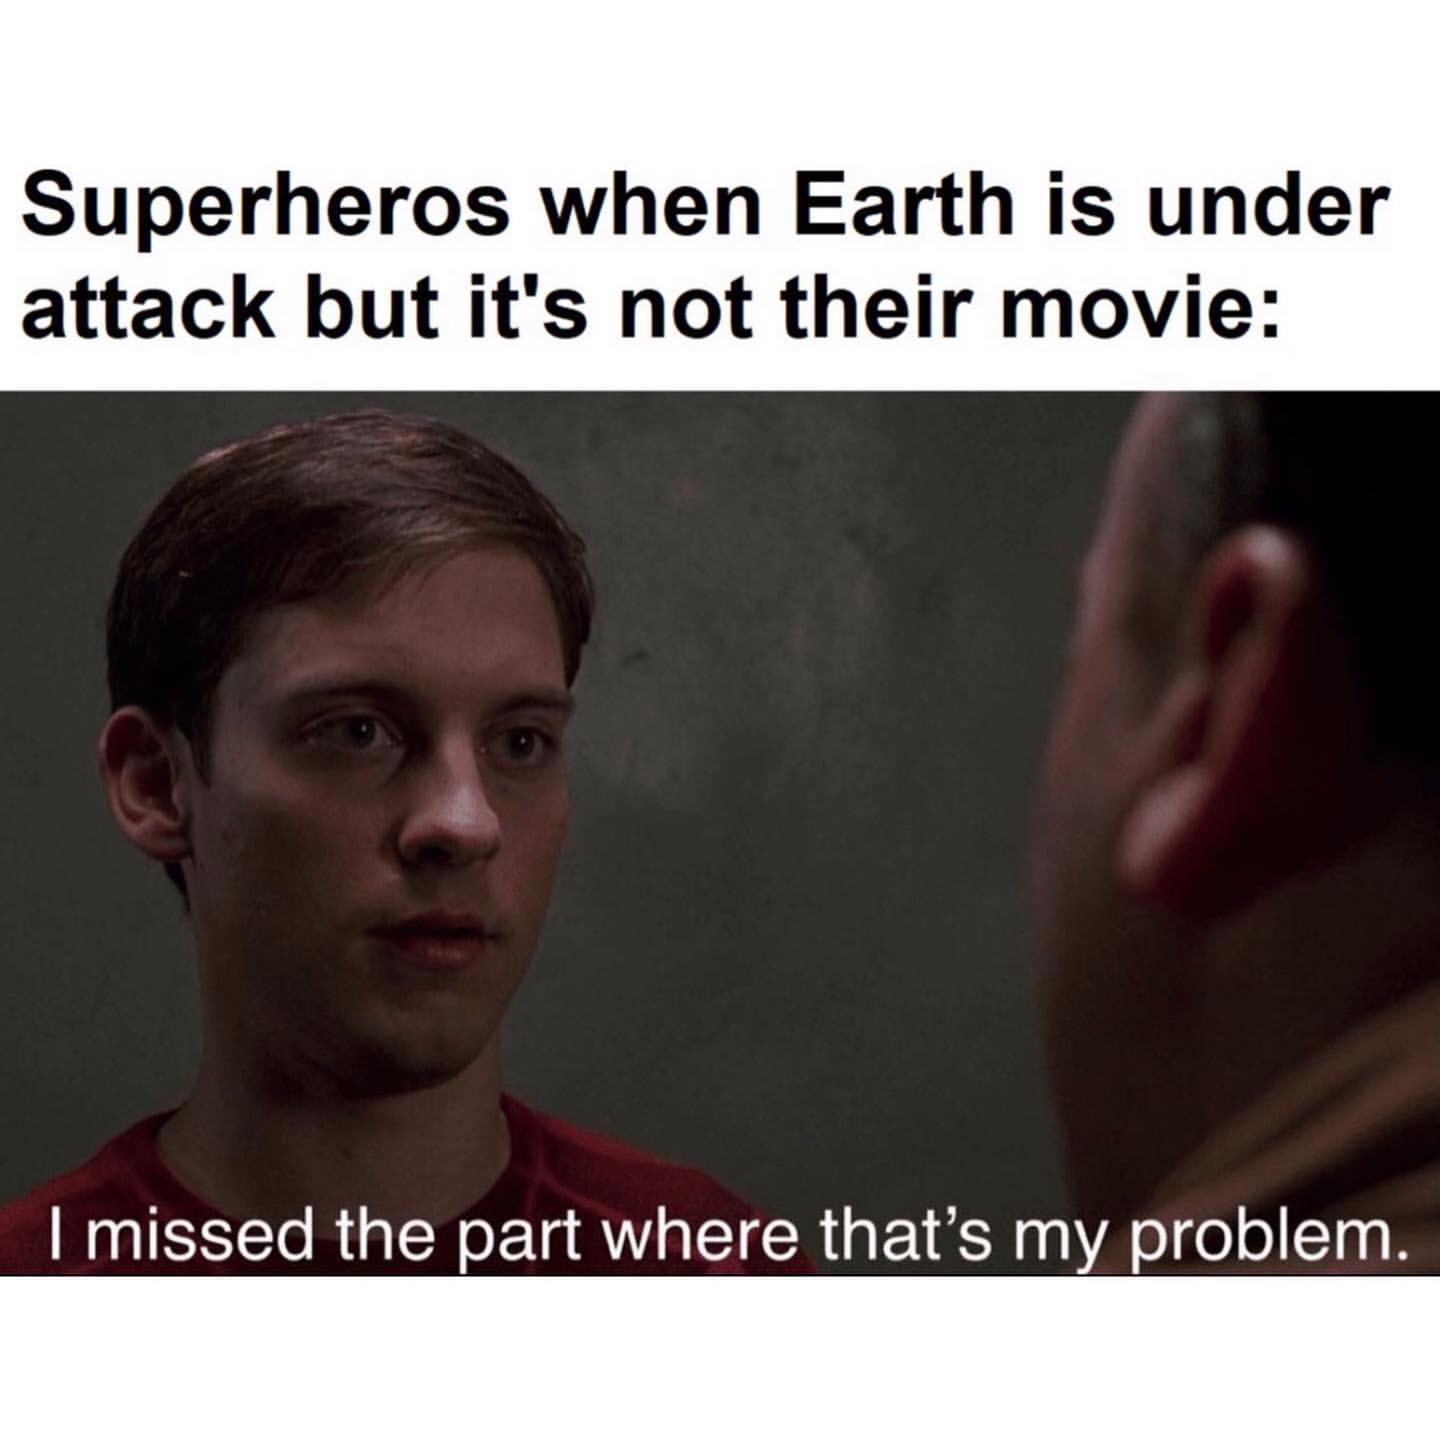 Superheros when Earth is under attack but it's not their movie: I missed the part where that's my problem.